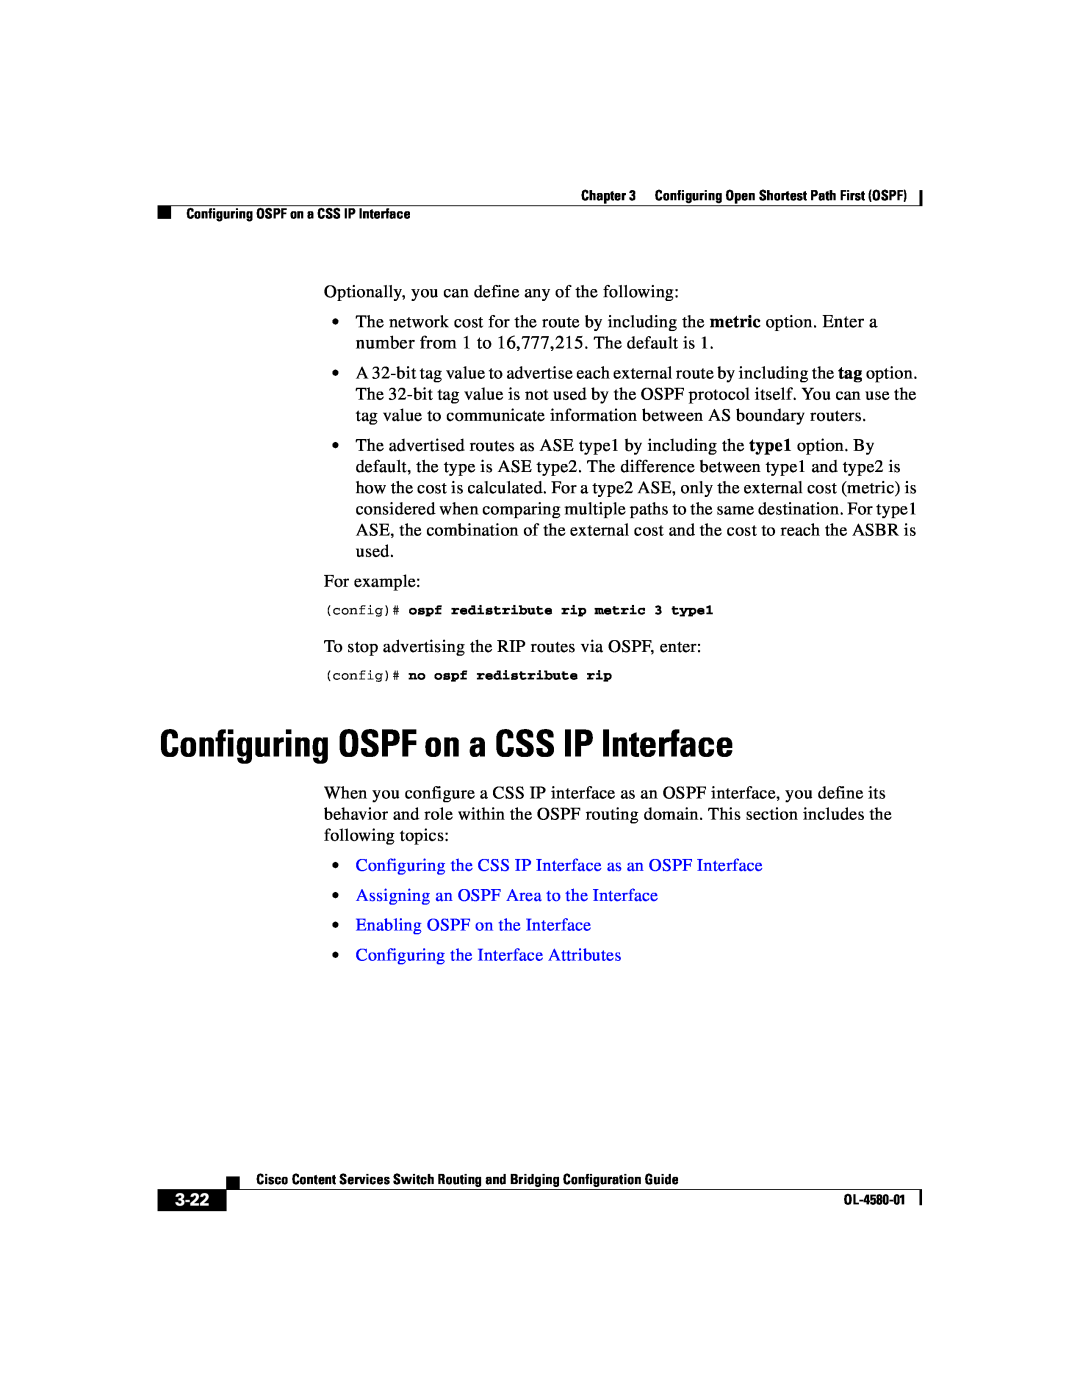 Cisco Systems OL-4580-01 Configuring OSPF on a CSS IP Interface, Configuring the CSS IP Interface as an OSPF Interface 